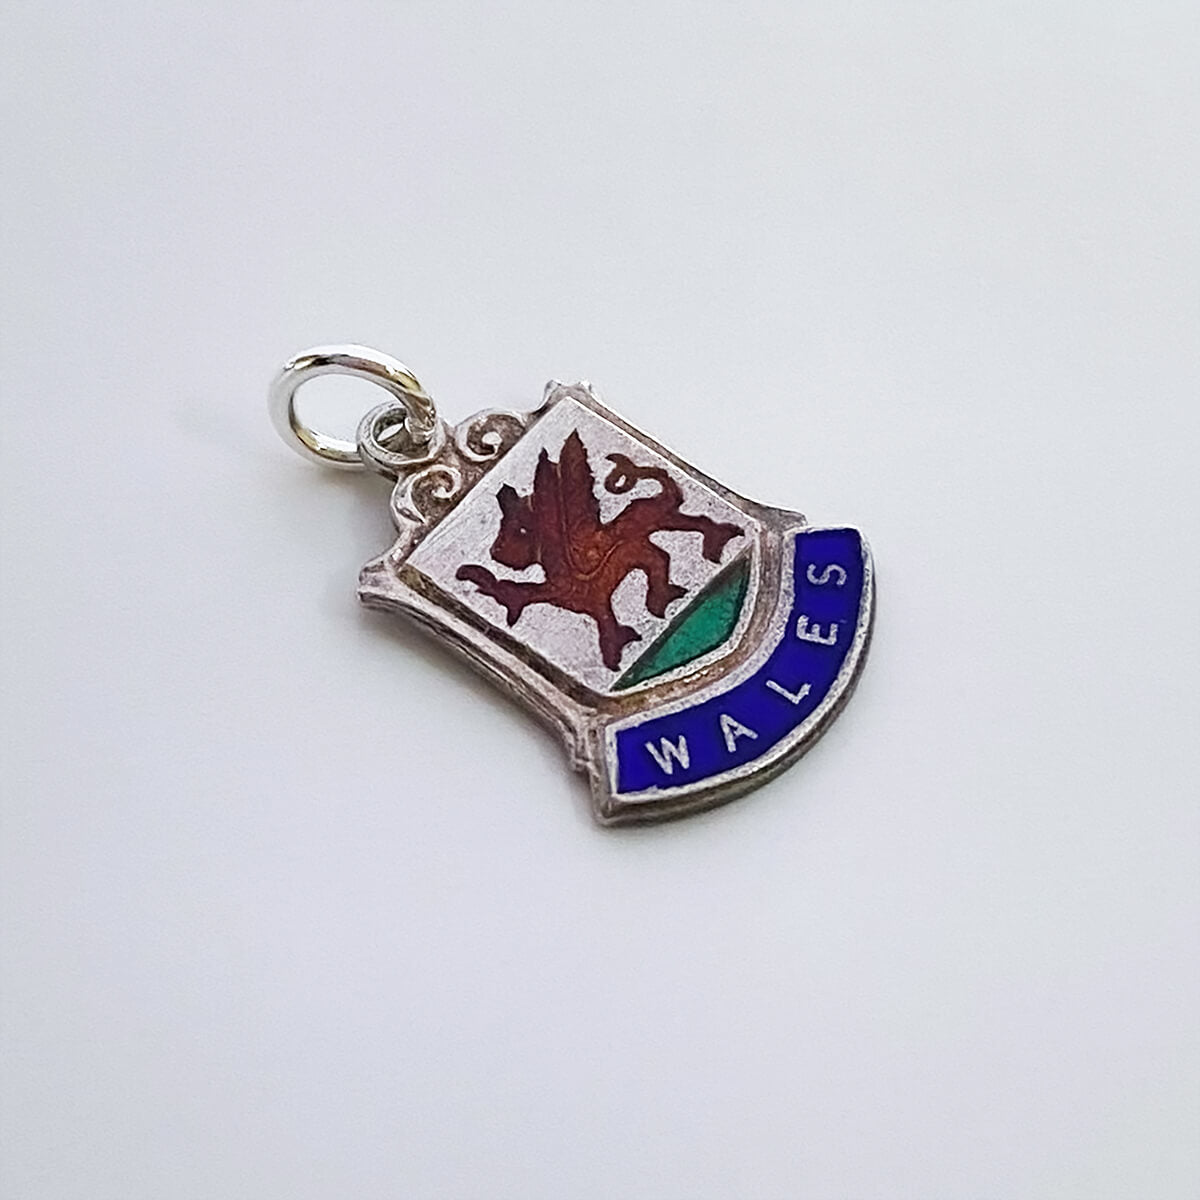 Vintage silver and enamel Welsh shield charm